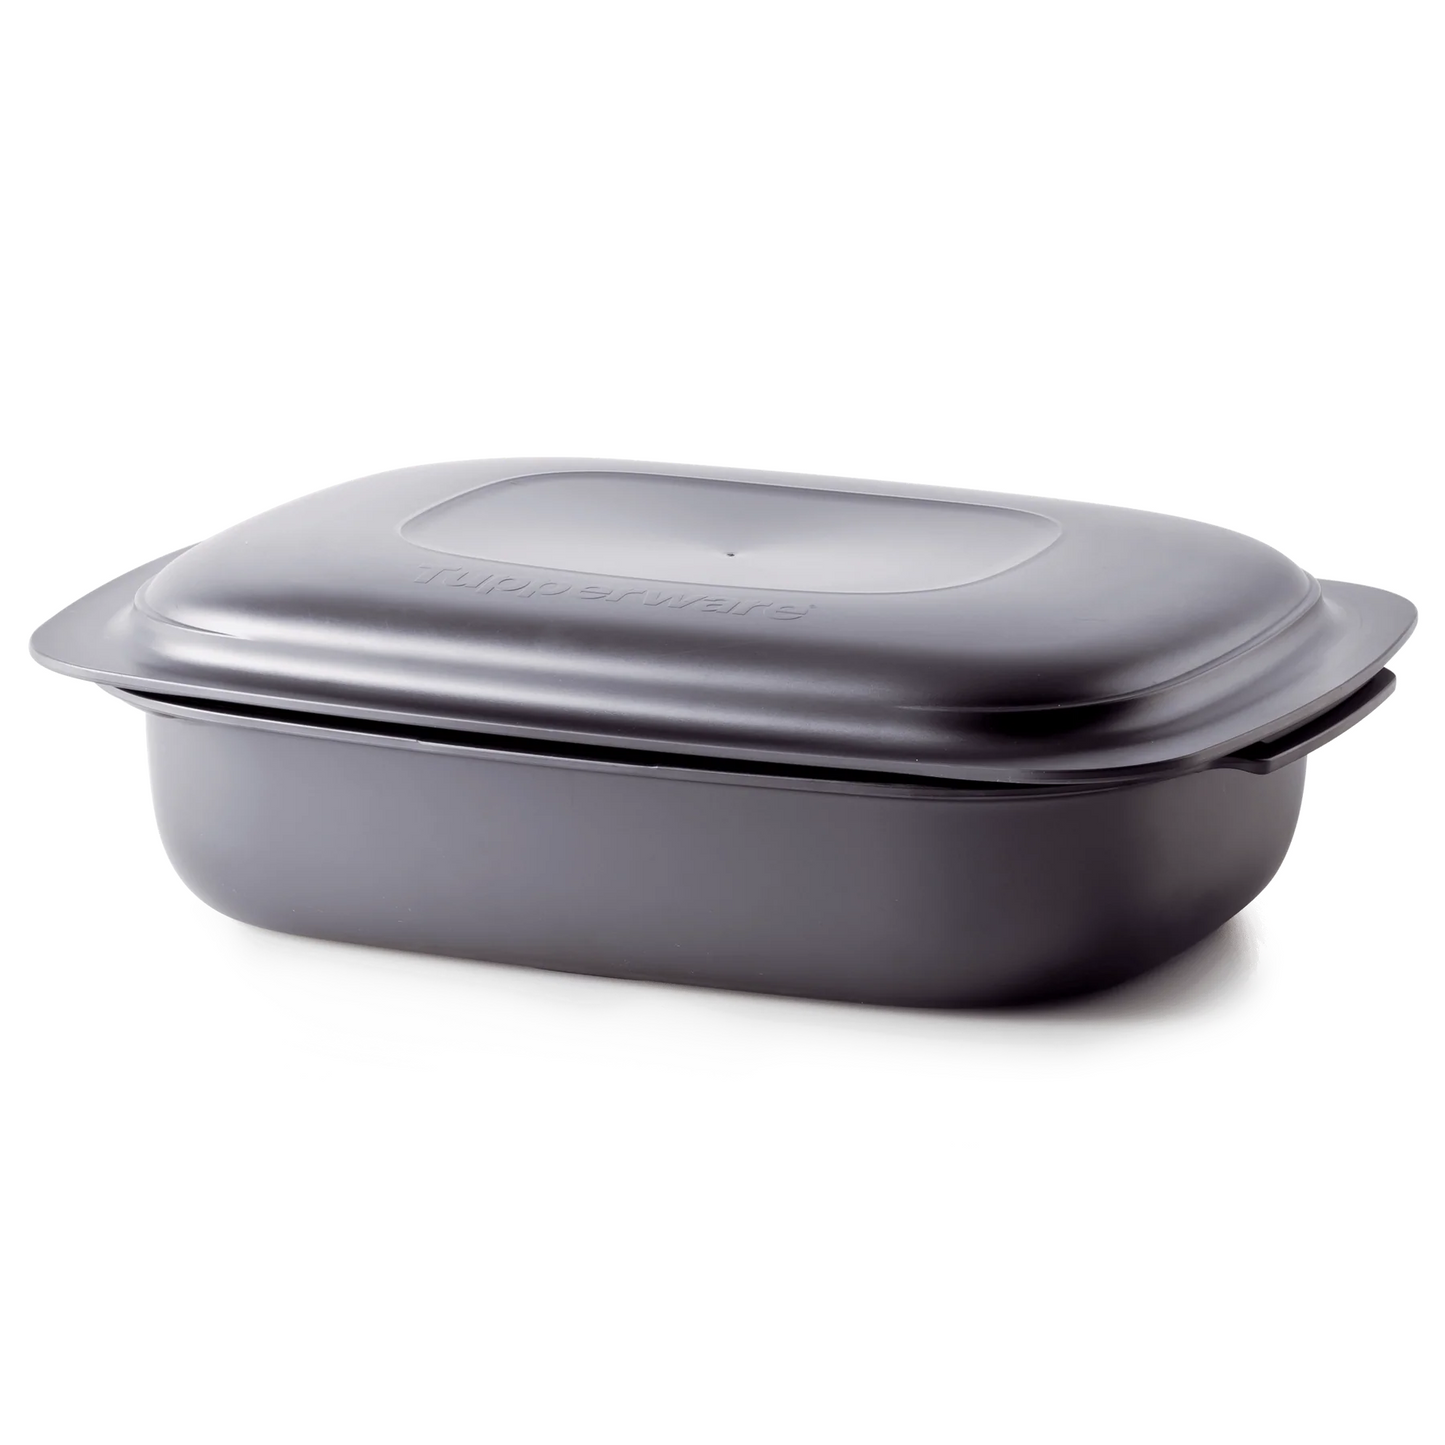 Tupperware Ultra Pro 3.5 lt Oven Container with Lid